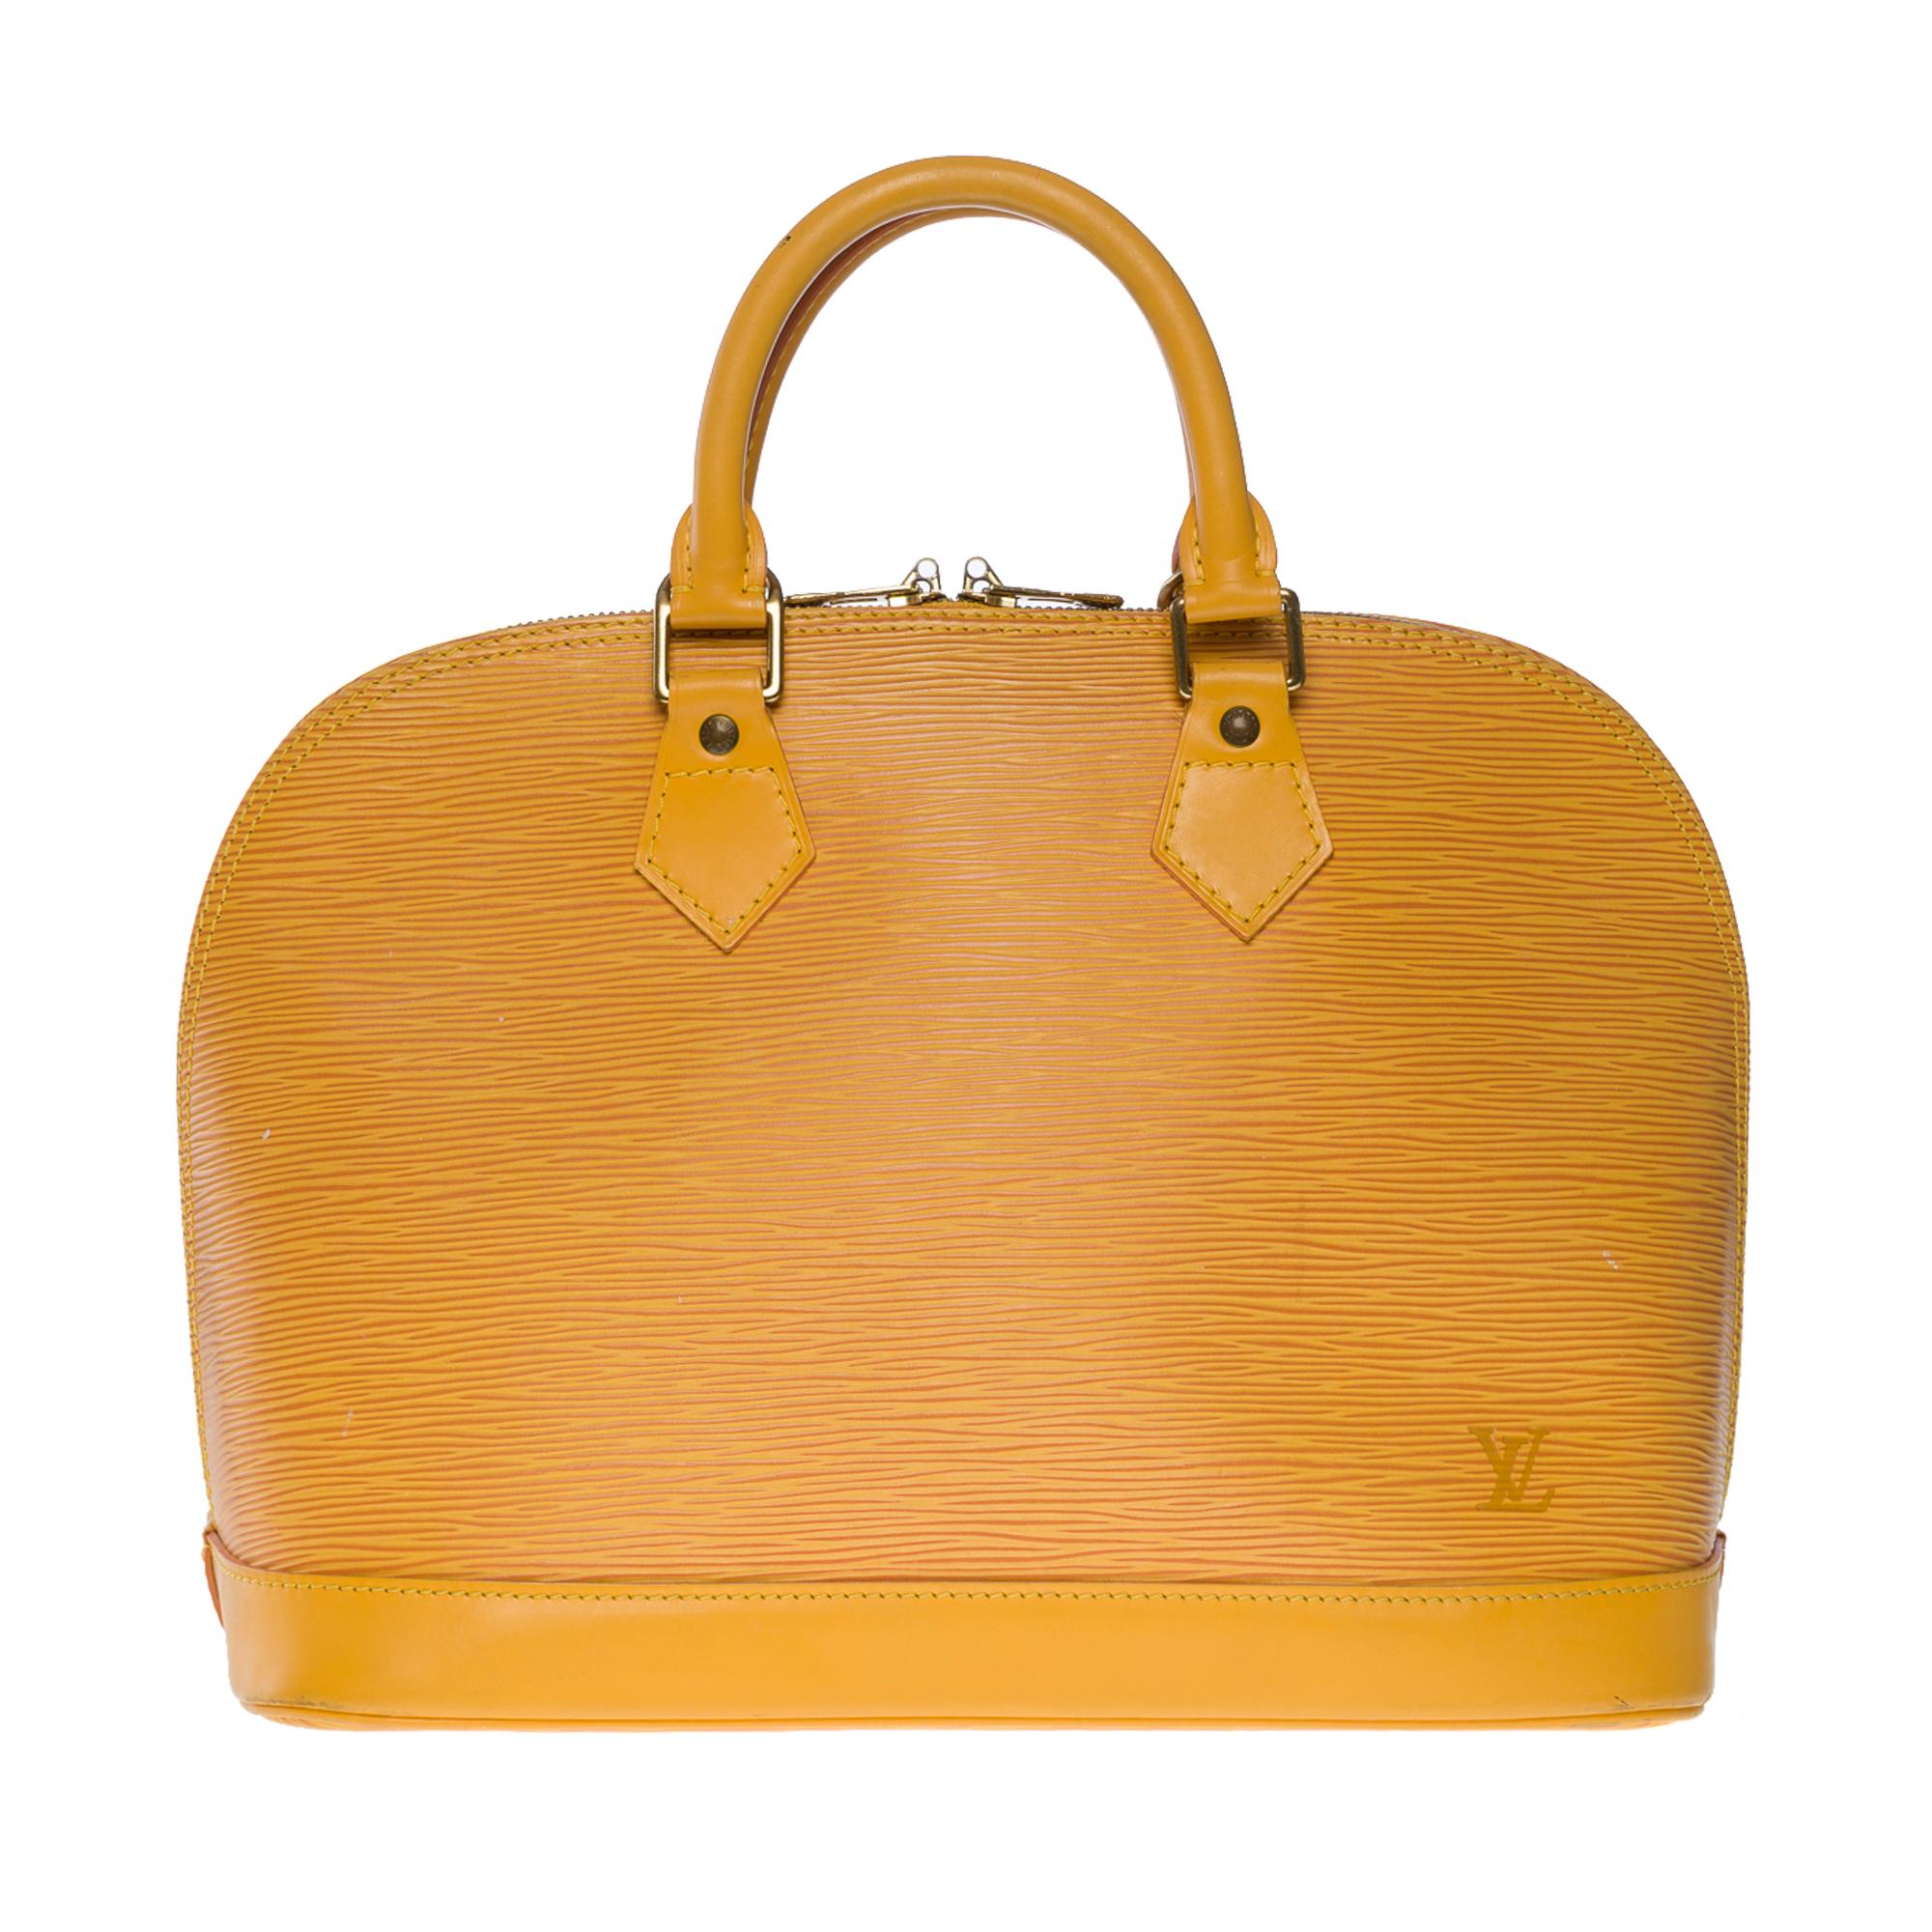 Very Chic Louis Vuitton Alma handbag in yellow epi leather, gold-plated metal hardware, double yellow leather handle for a hand-held

Double zip closure
Black canvas lining, one patch pocket
Date: 1996
Dimensions: 30 X 25 X 16 cm (11.8 x 9.8 x 6.3